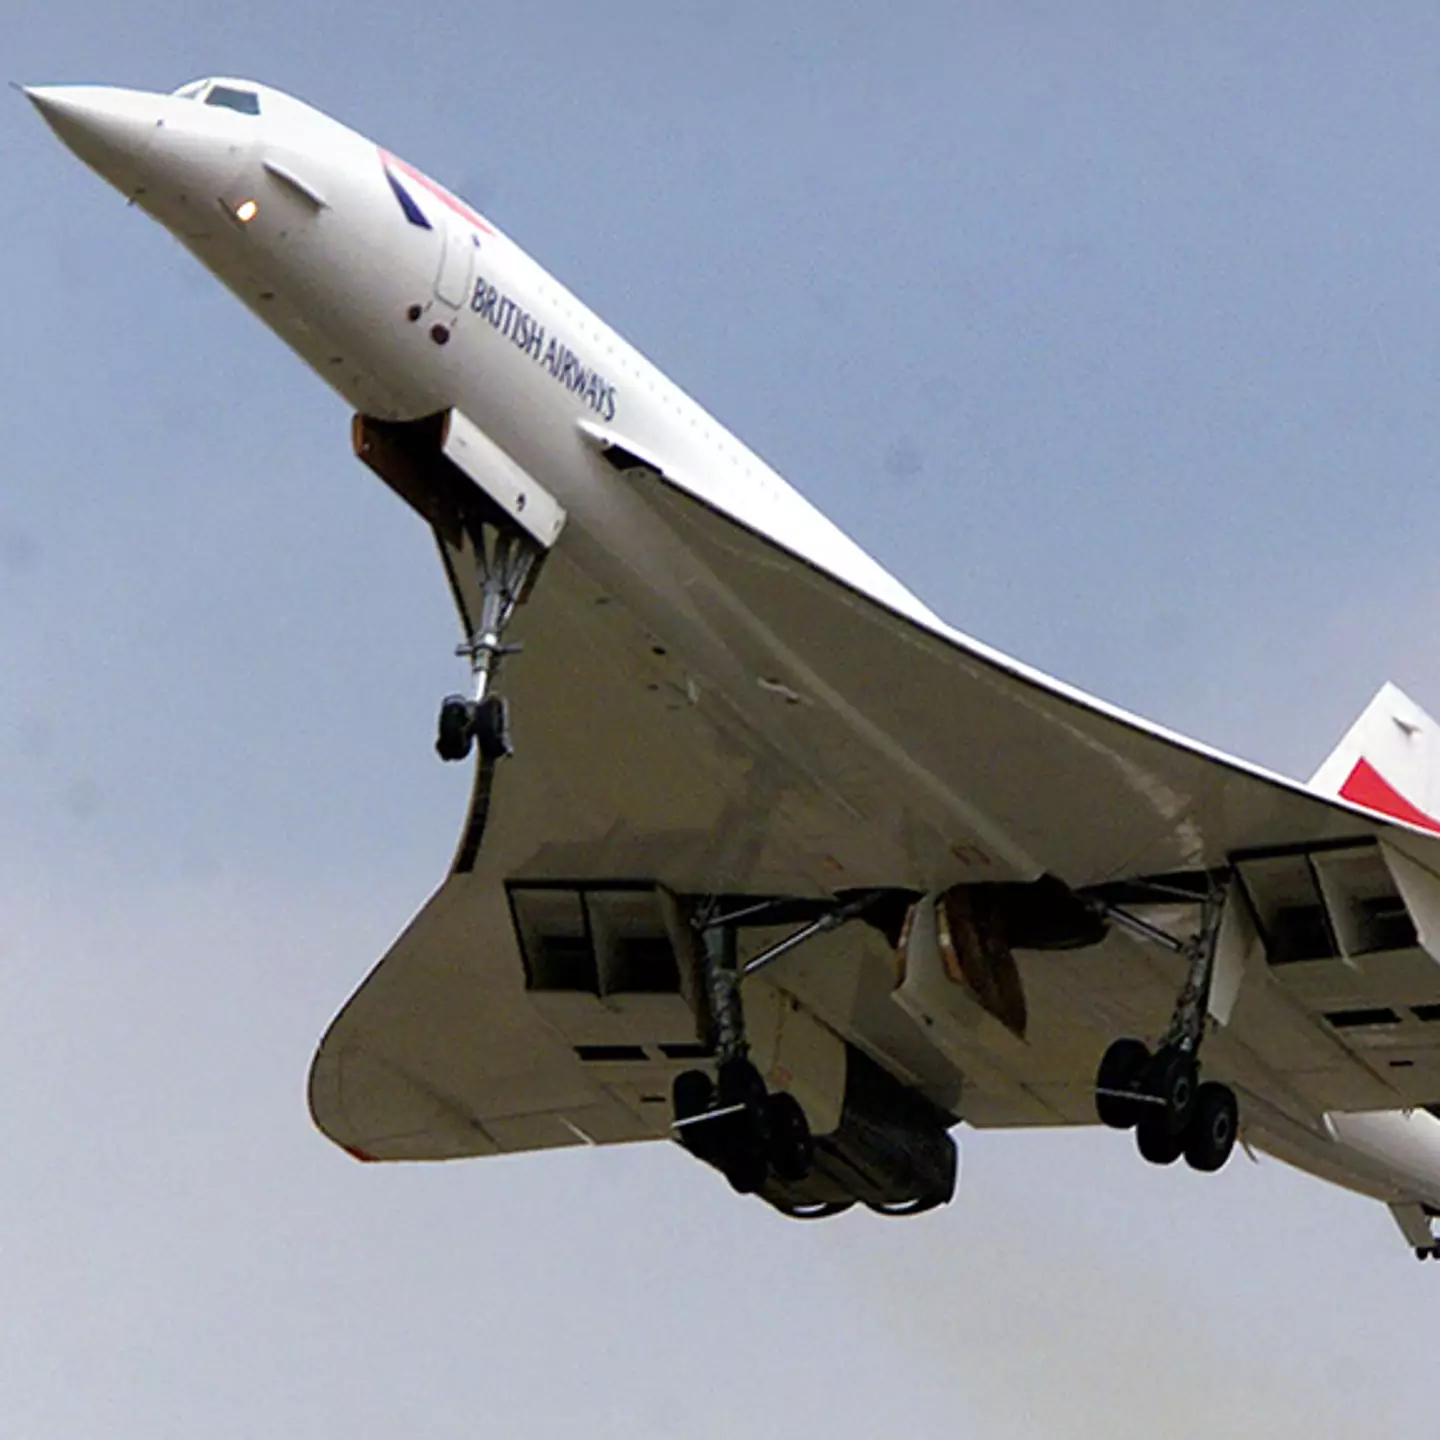 2003 footage shows just how loud it was living near London Heathrow Airport as Concorde took off